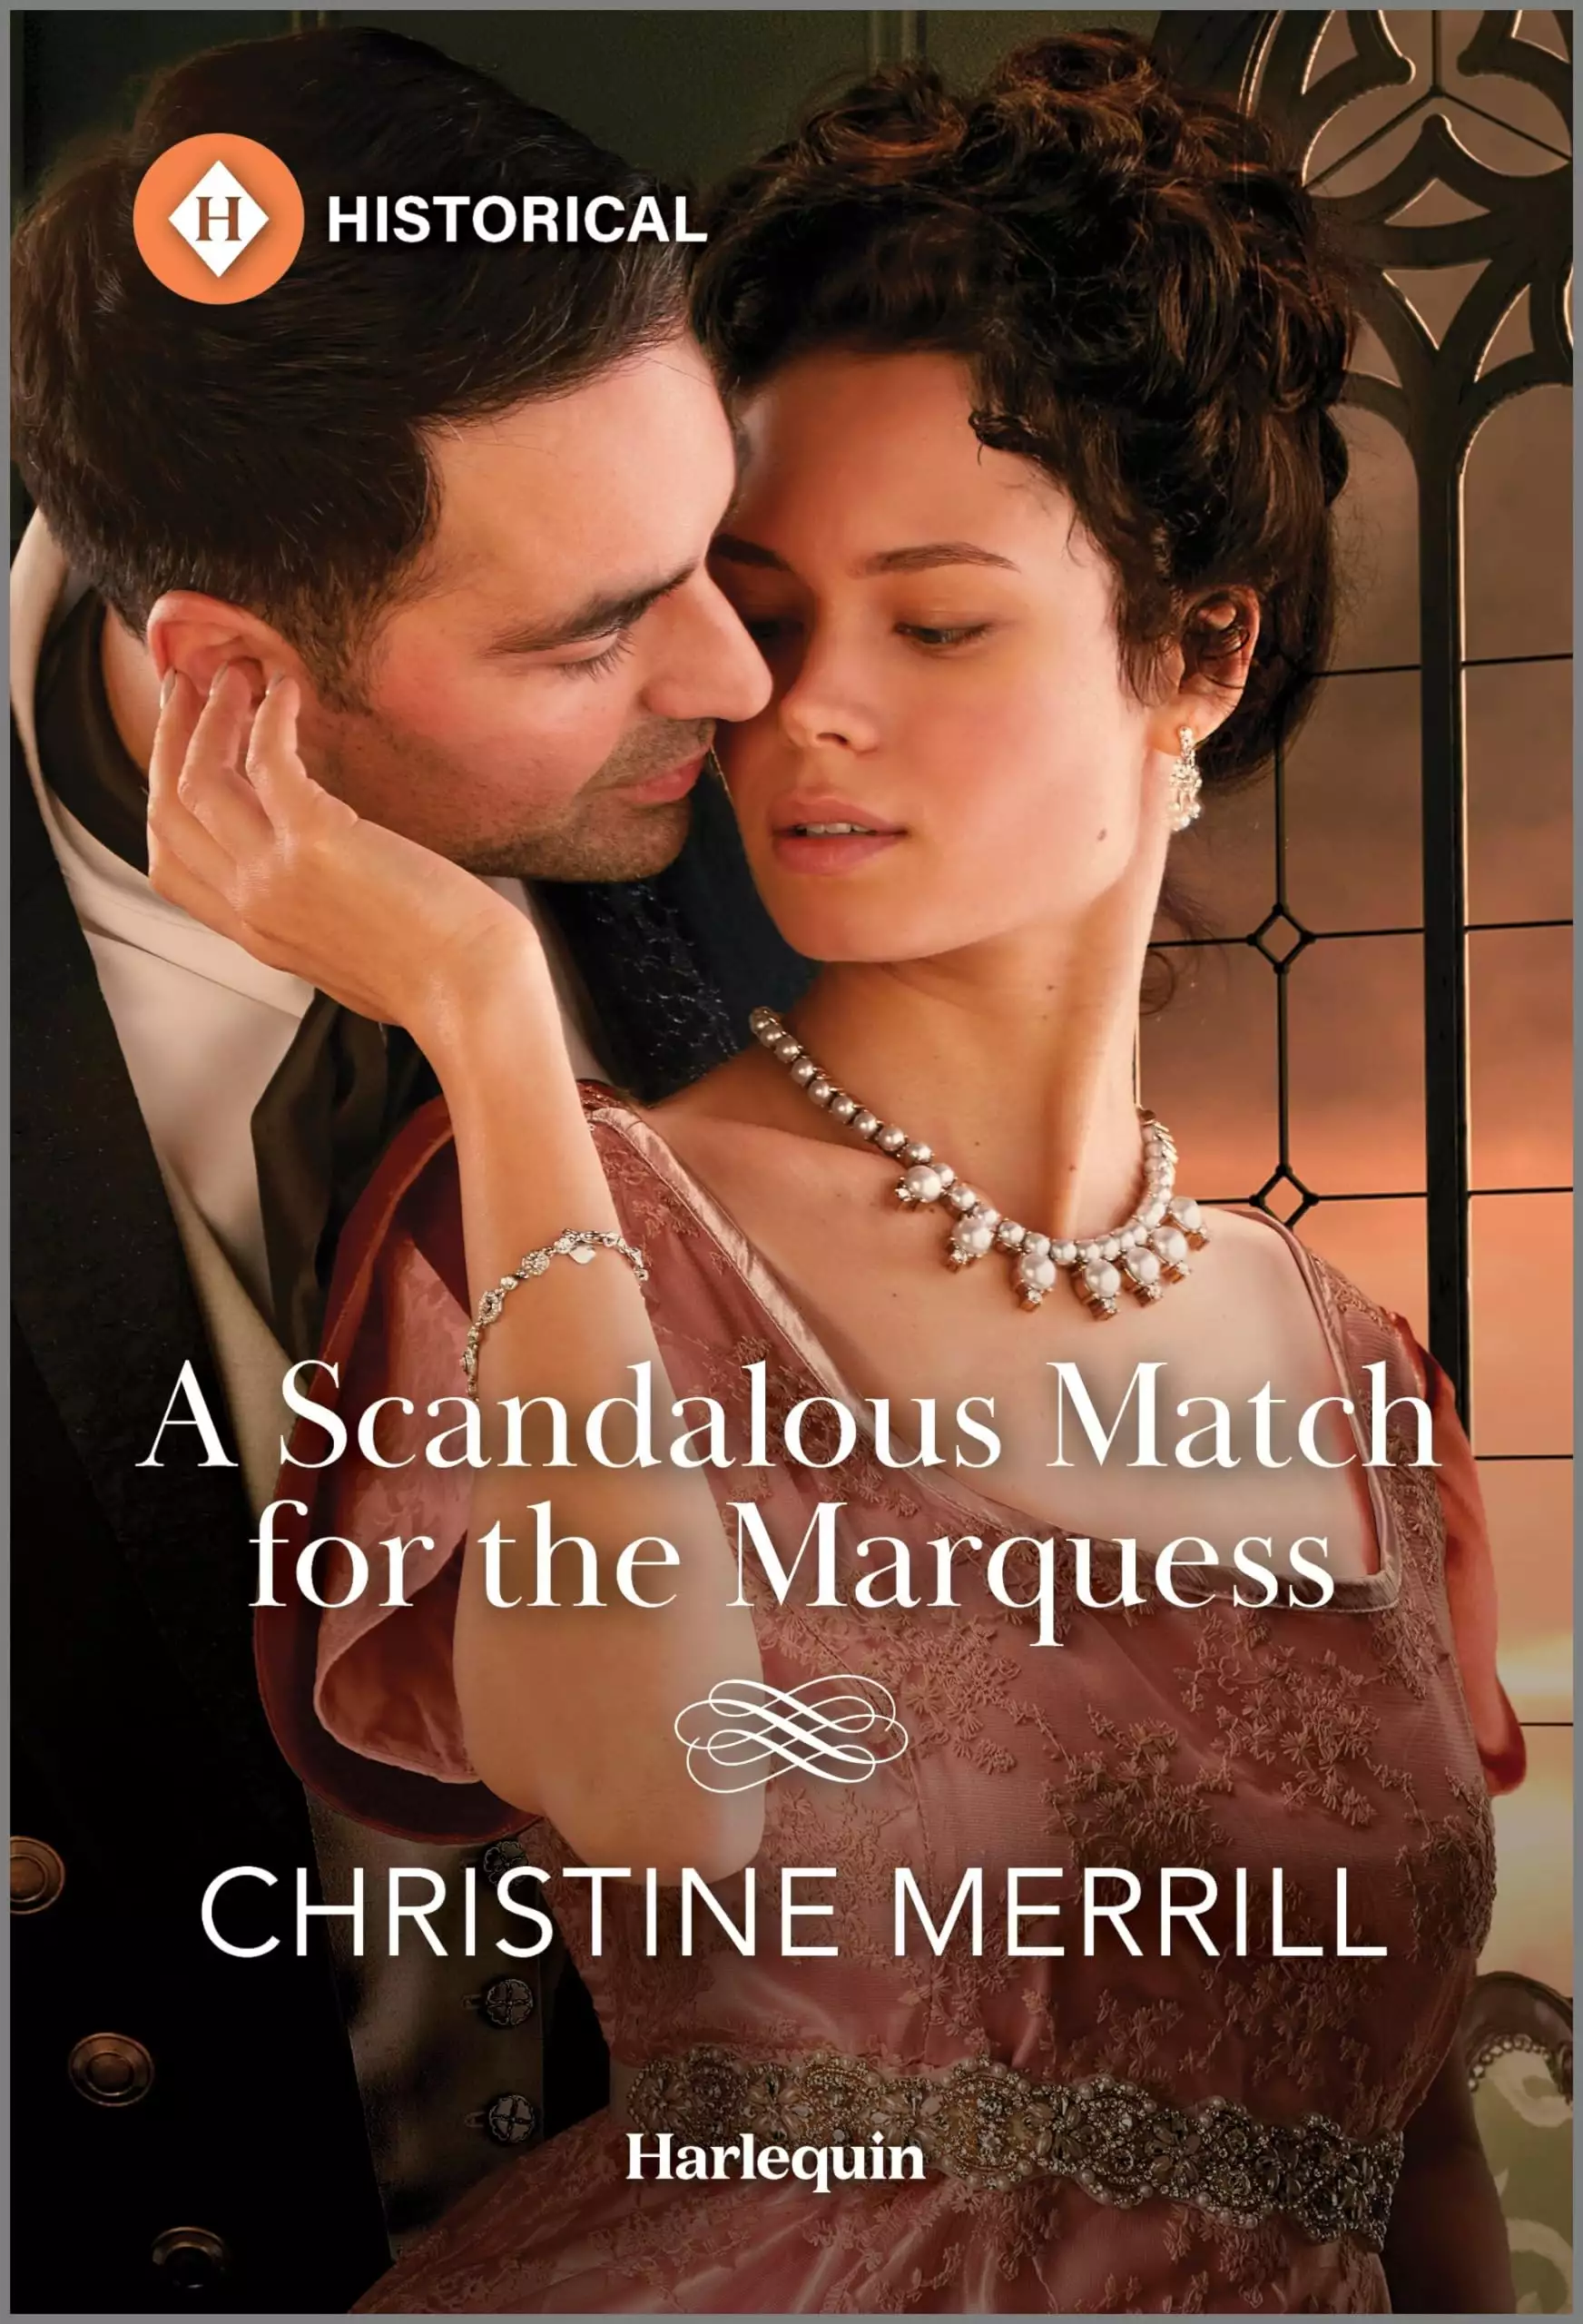 A Scandalous Match for the Marquess